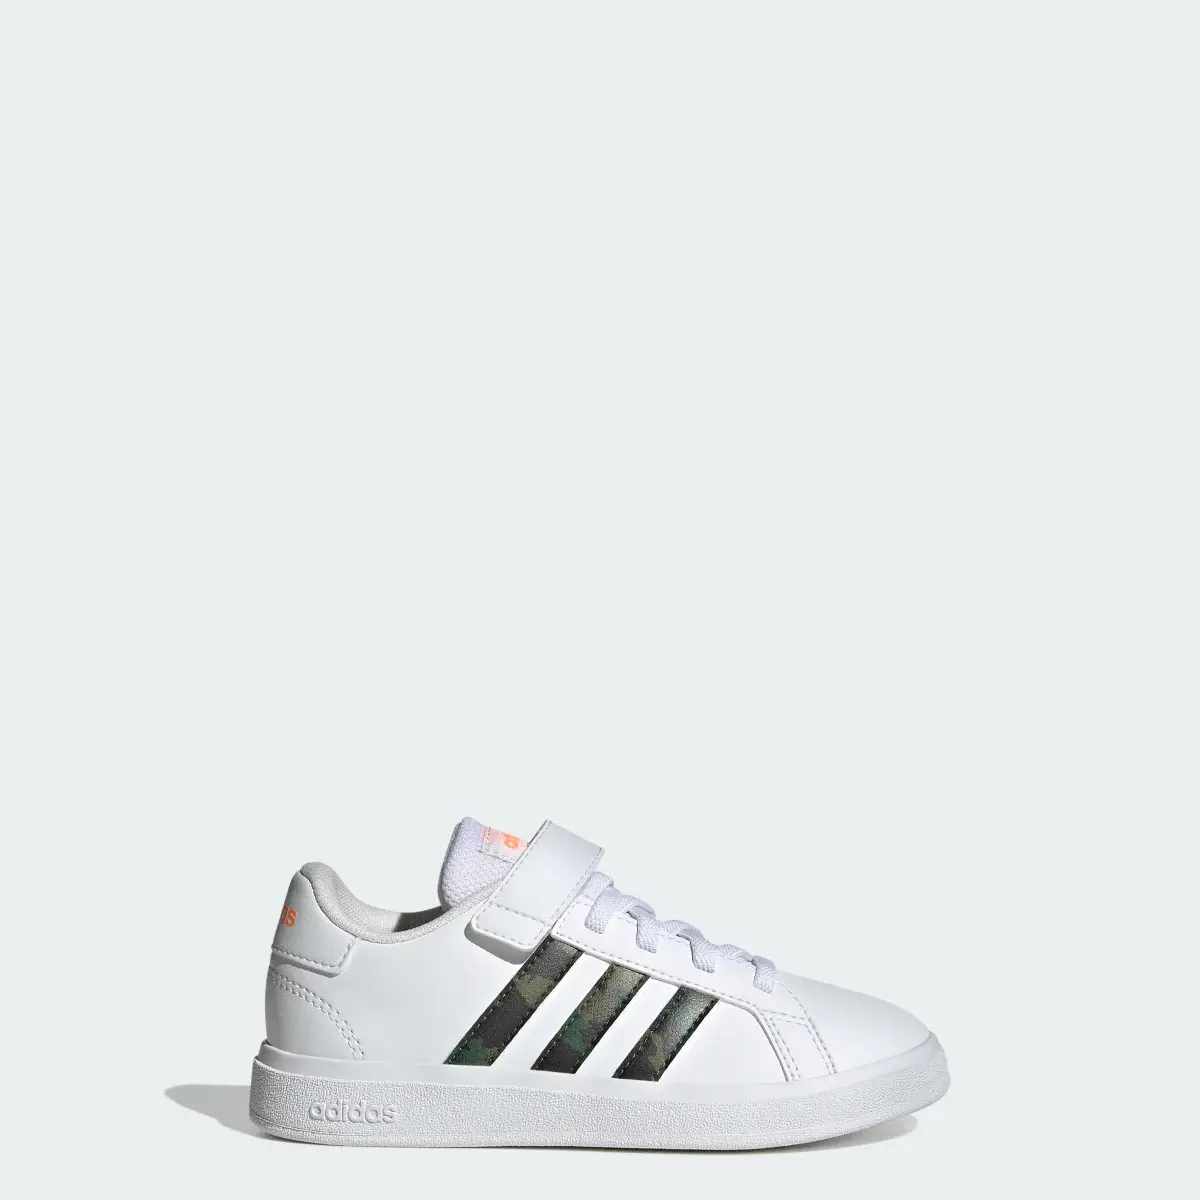 Adidas Grand Court Lifestyle Court Elastic Lace and Top Strap Schuh. 1